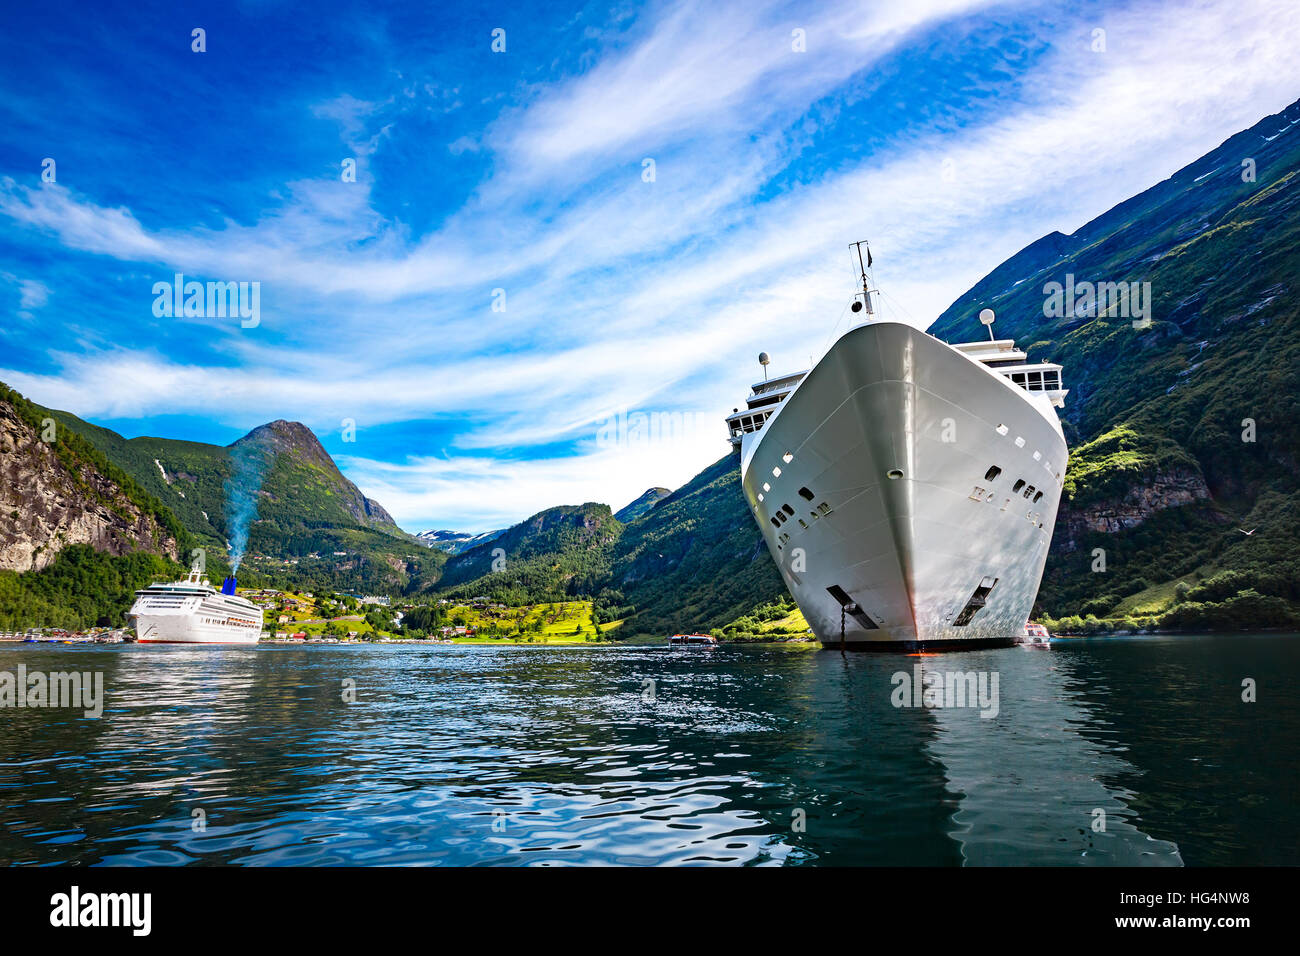 Cruise Ship, Cruise Liners On Geiranger fjord, Norway Stock Photo